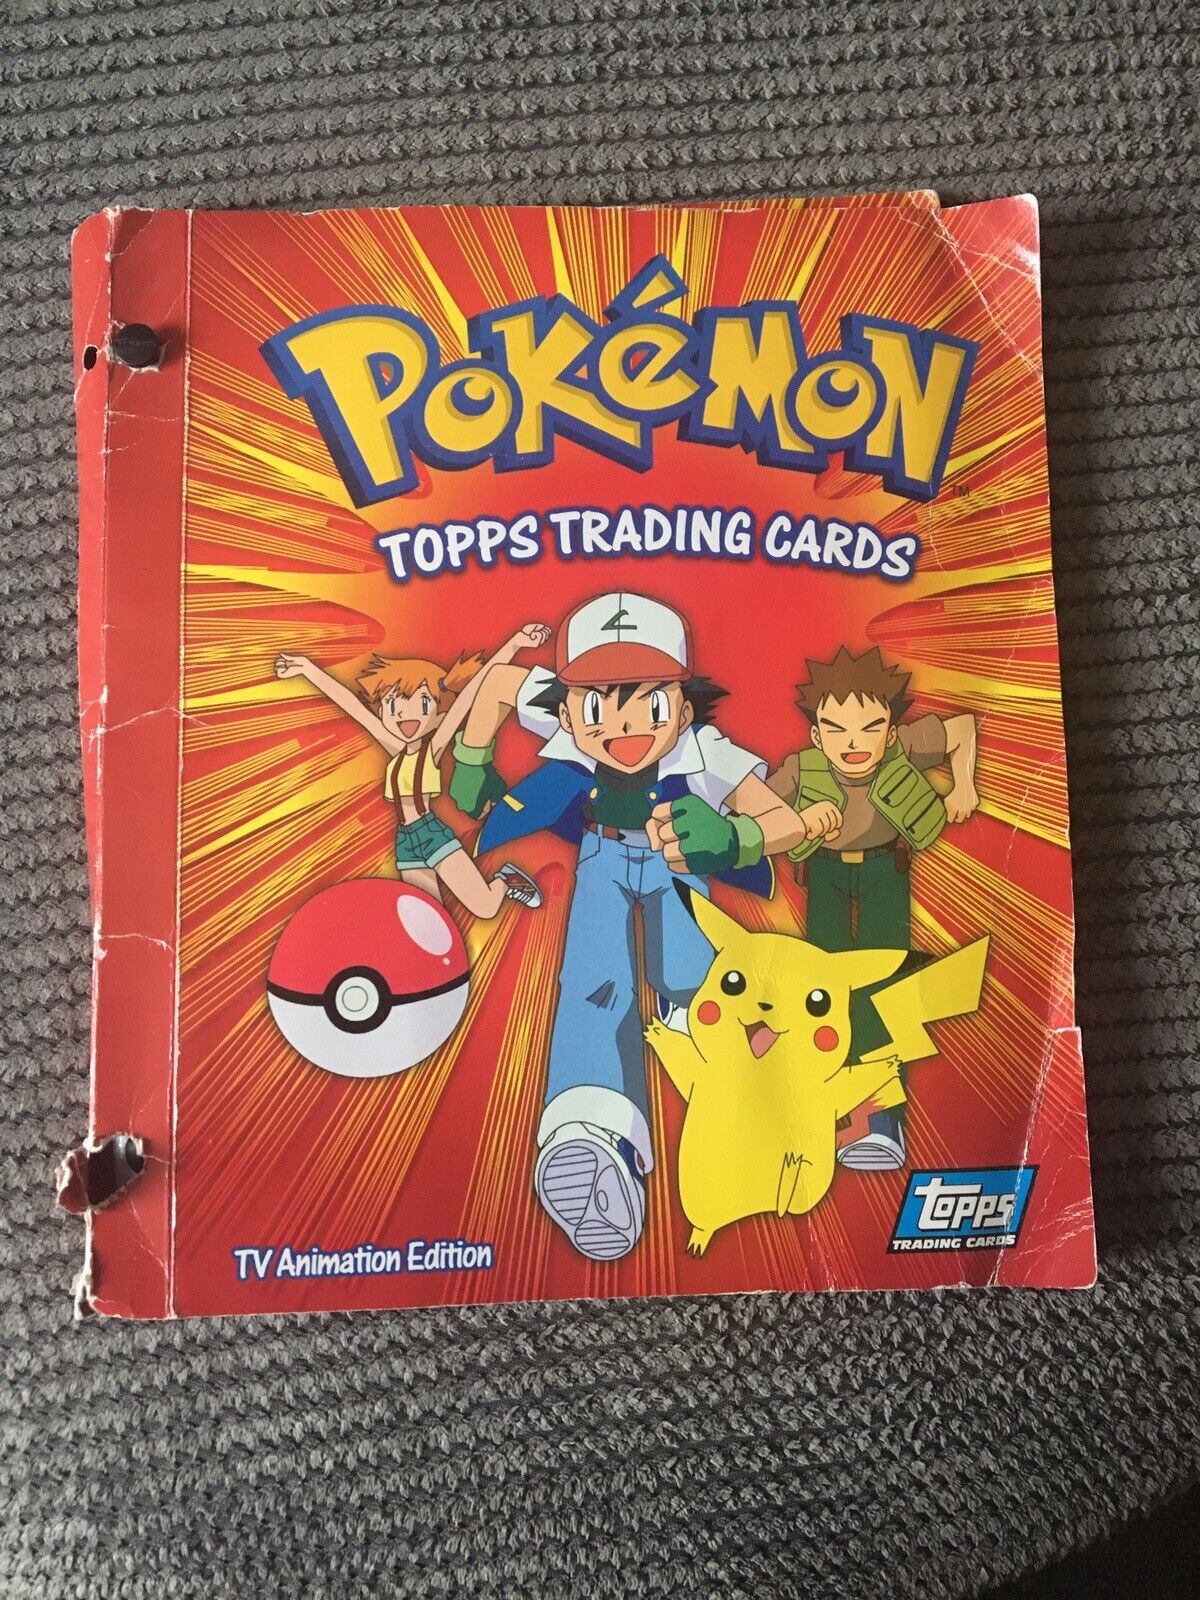 Pokemon 1990's Topps trading cards tv animation edition 111 cards